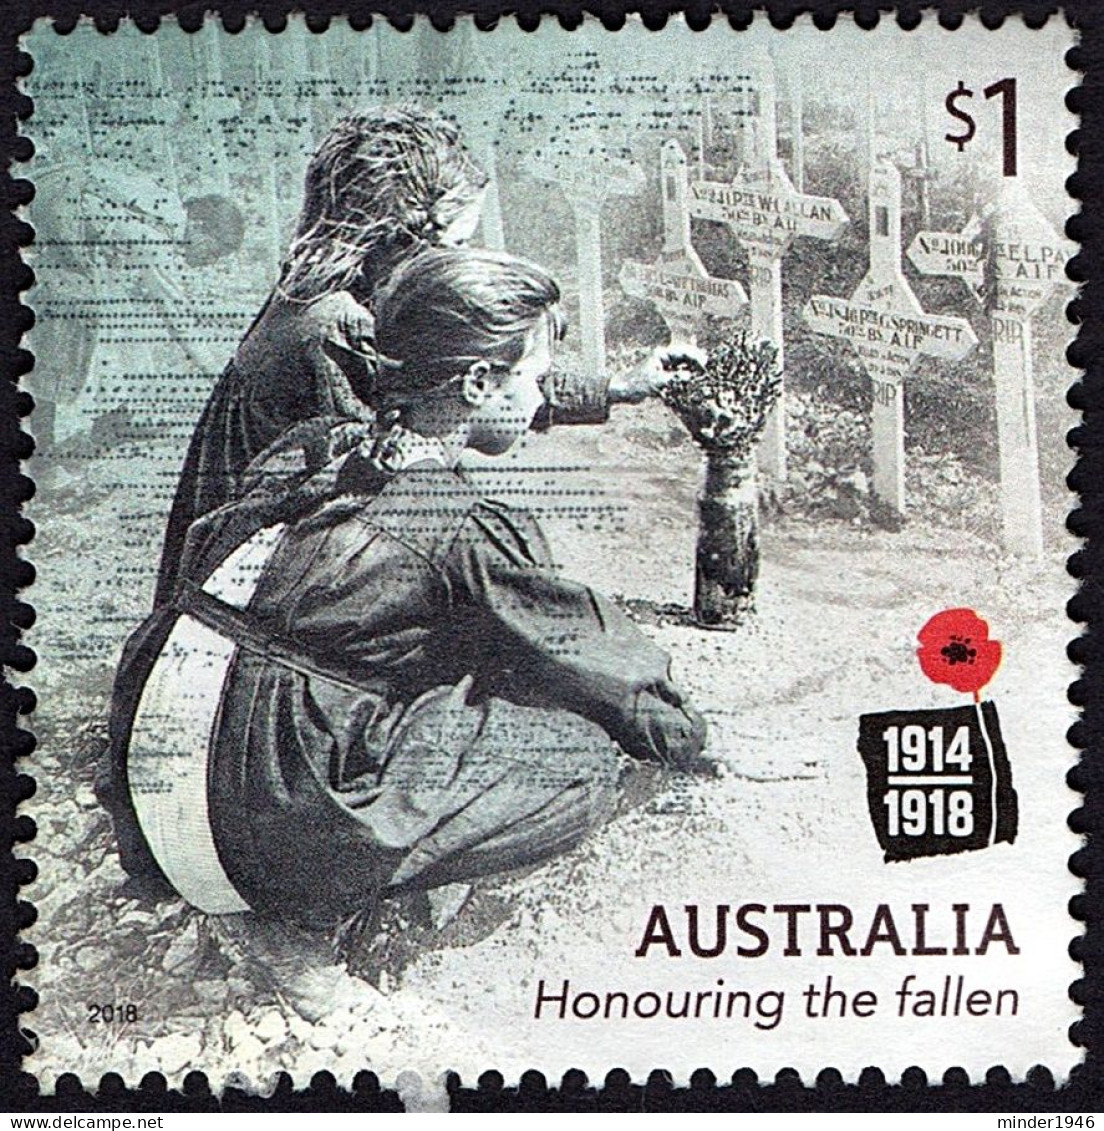 AUSTRALIA 2018 $1 Multicoloured, Centenary Of WWI: 1918 - Honoring The Fallen-Laying Of Flowers Used - Oblitérés